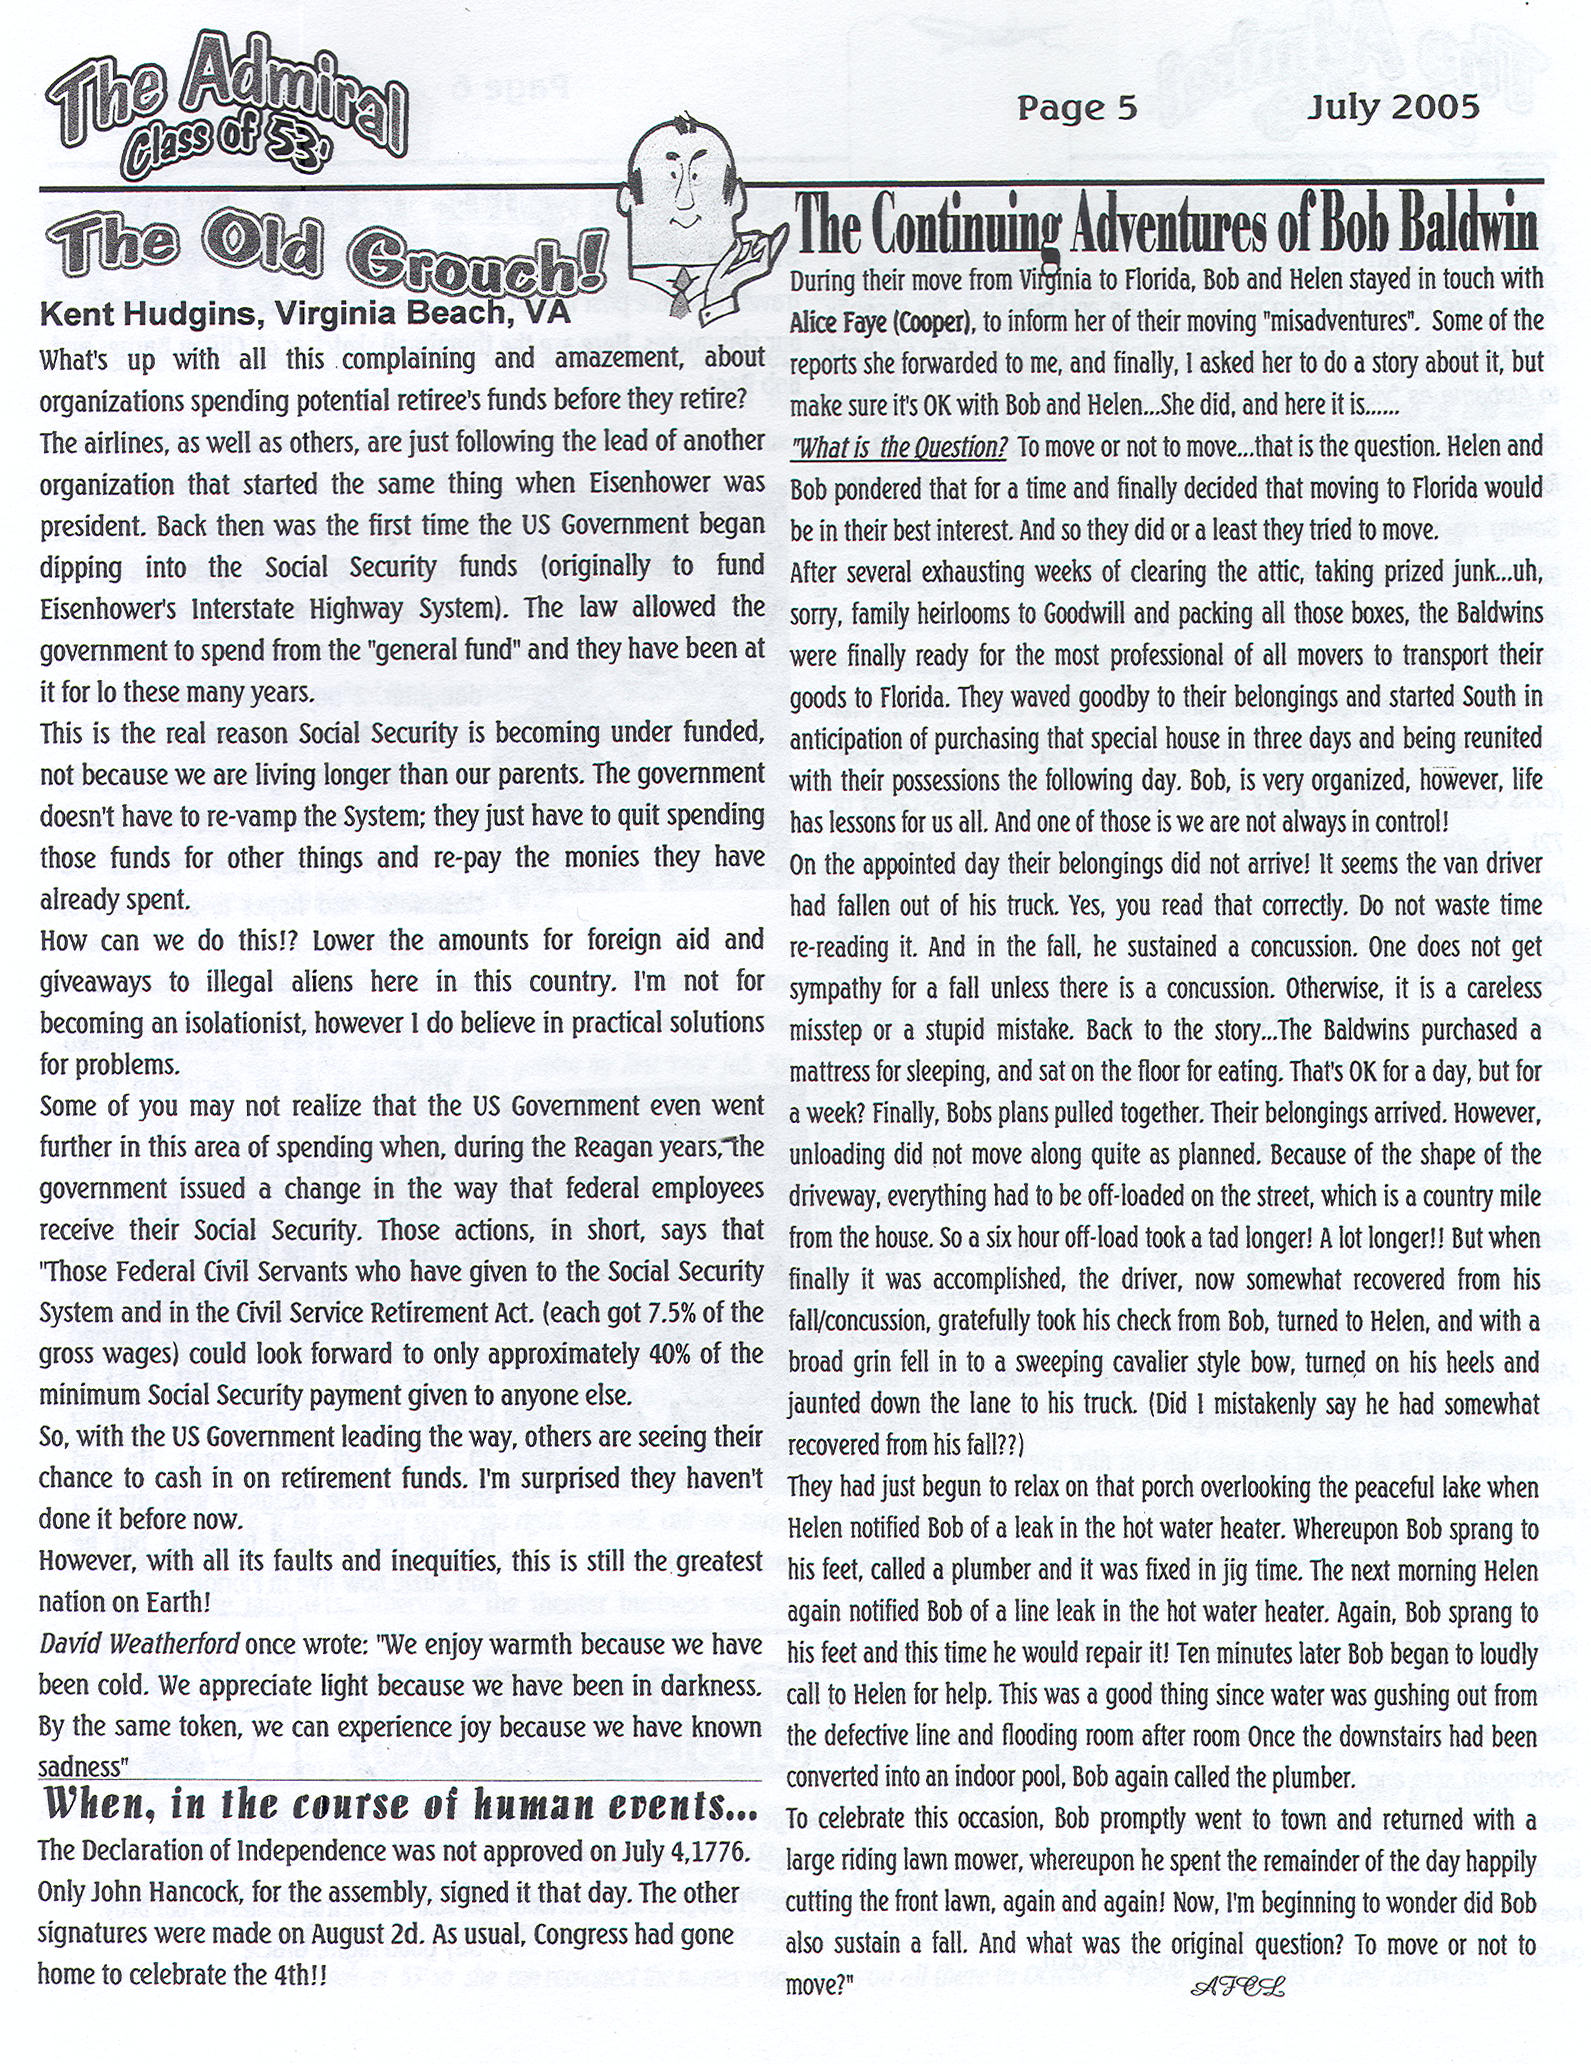 The Admiral - July 2005 - pg. 5